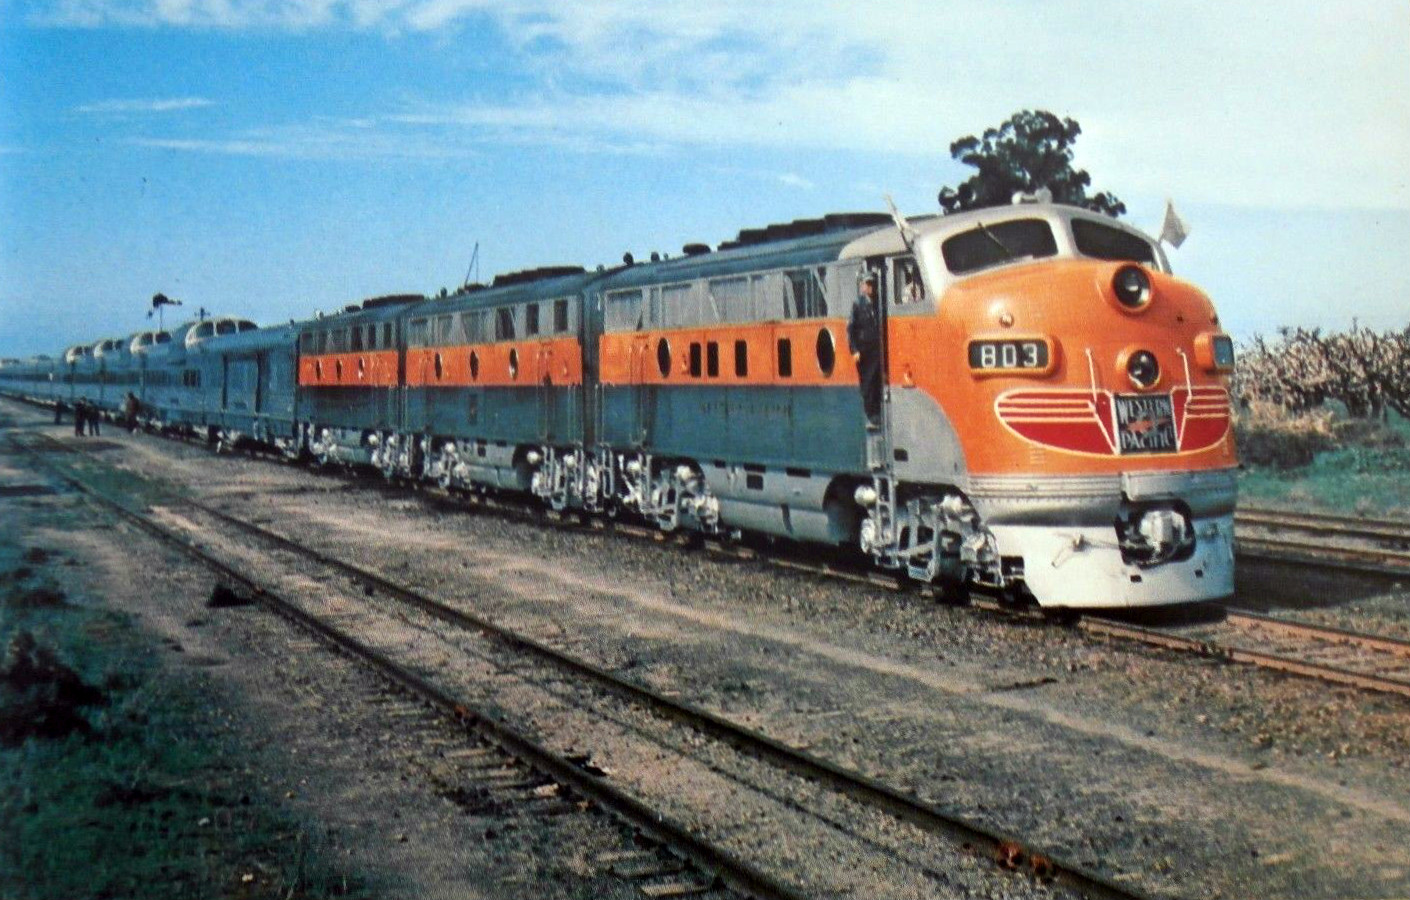 WETERN PACIFICS' CALIFORNIA ZEPHYR PAUSED ON THE MAINLINE AS PASSENGERS GET READY TO BOARD